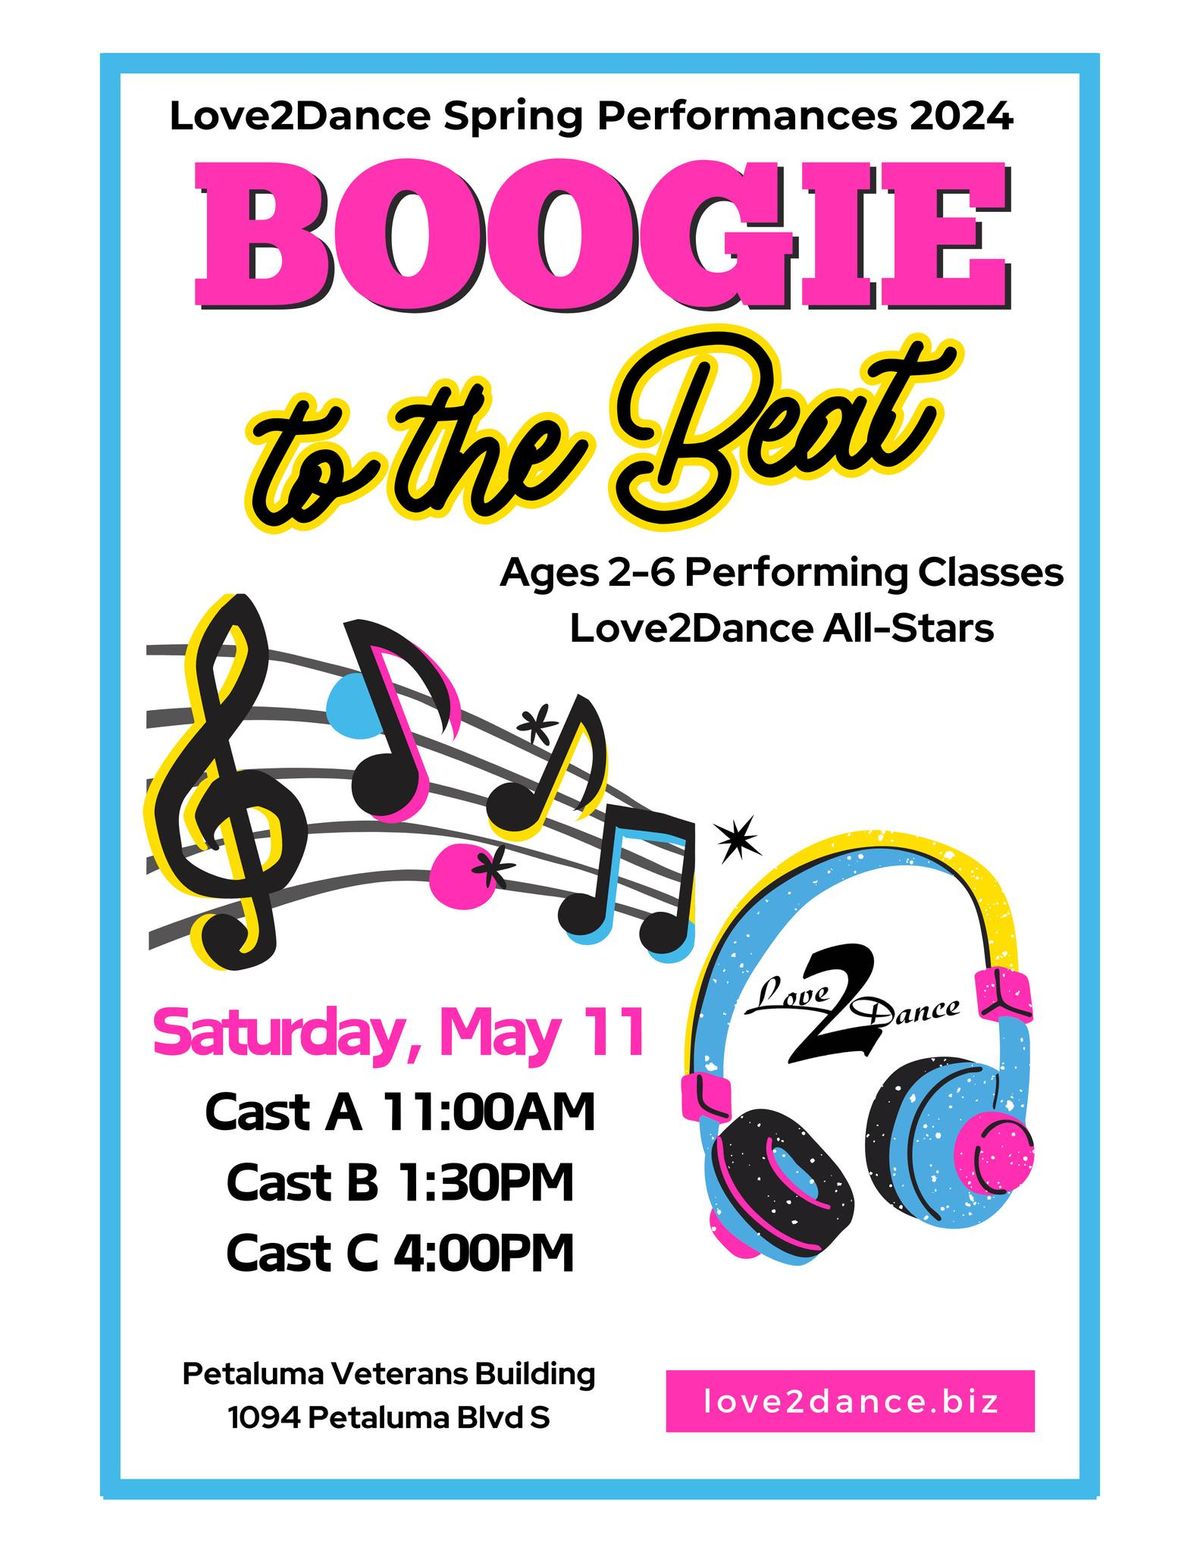 Love2Dance Spring Performance "Boogie to the Beat"